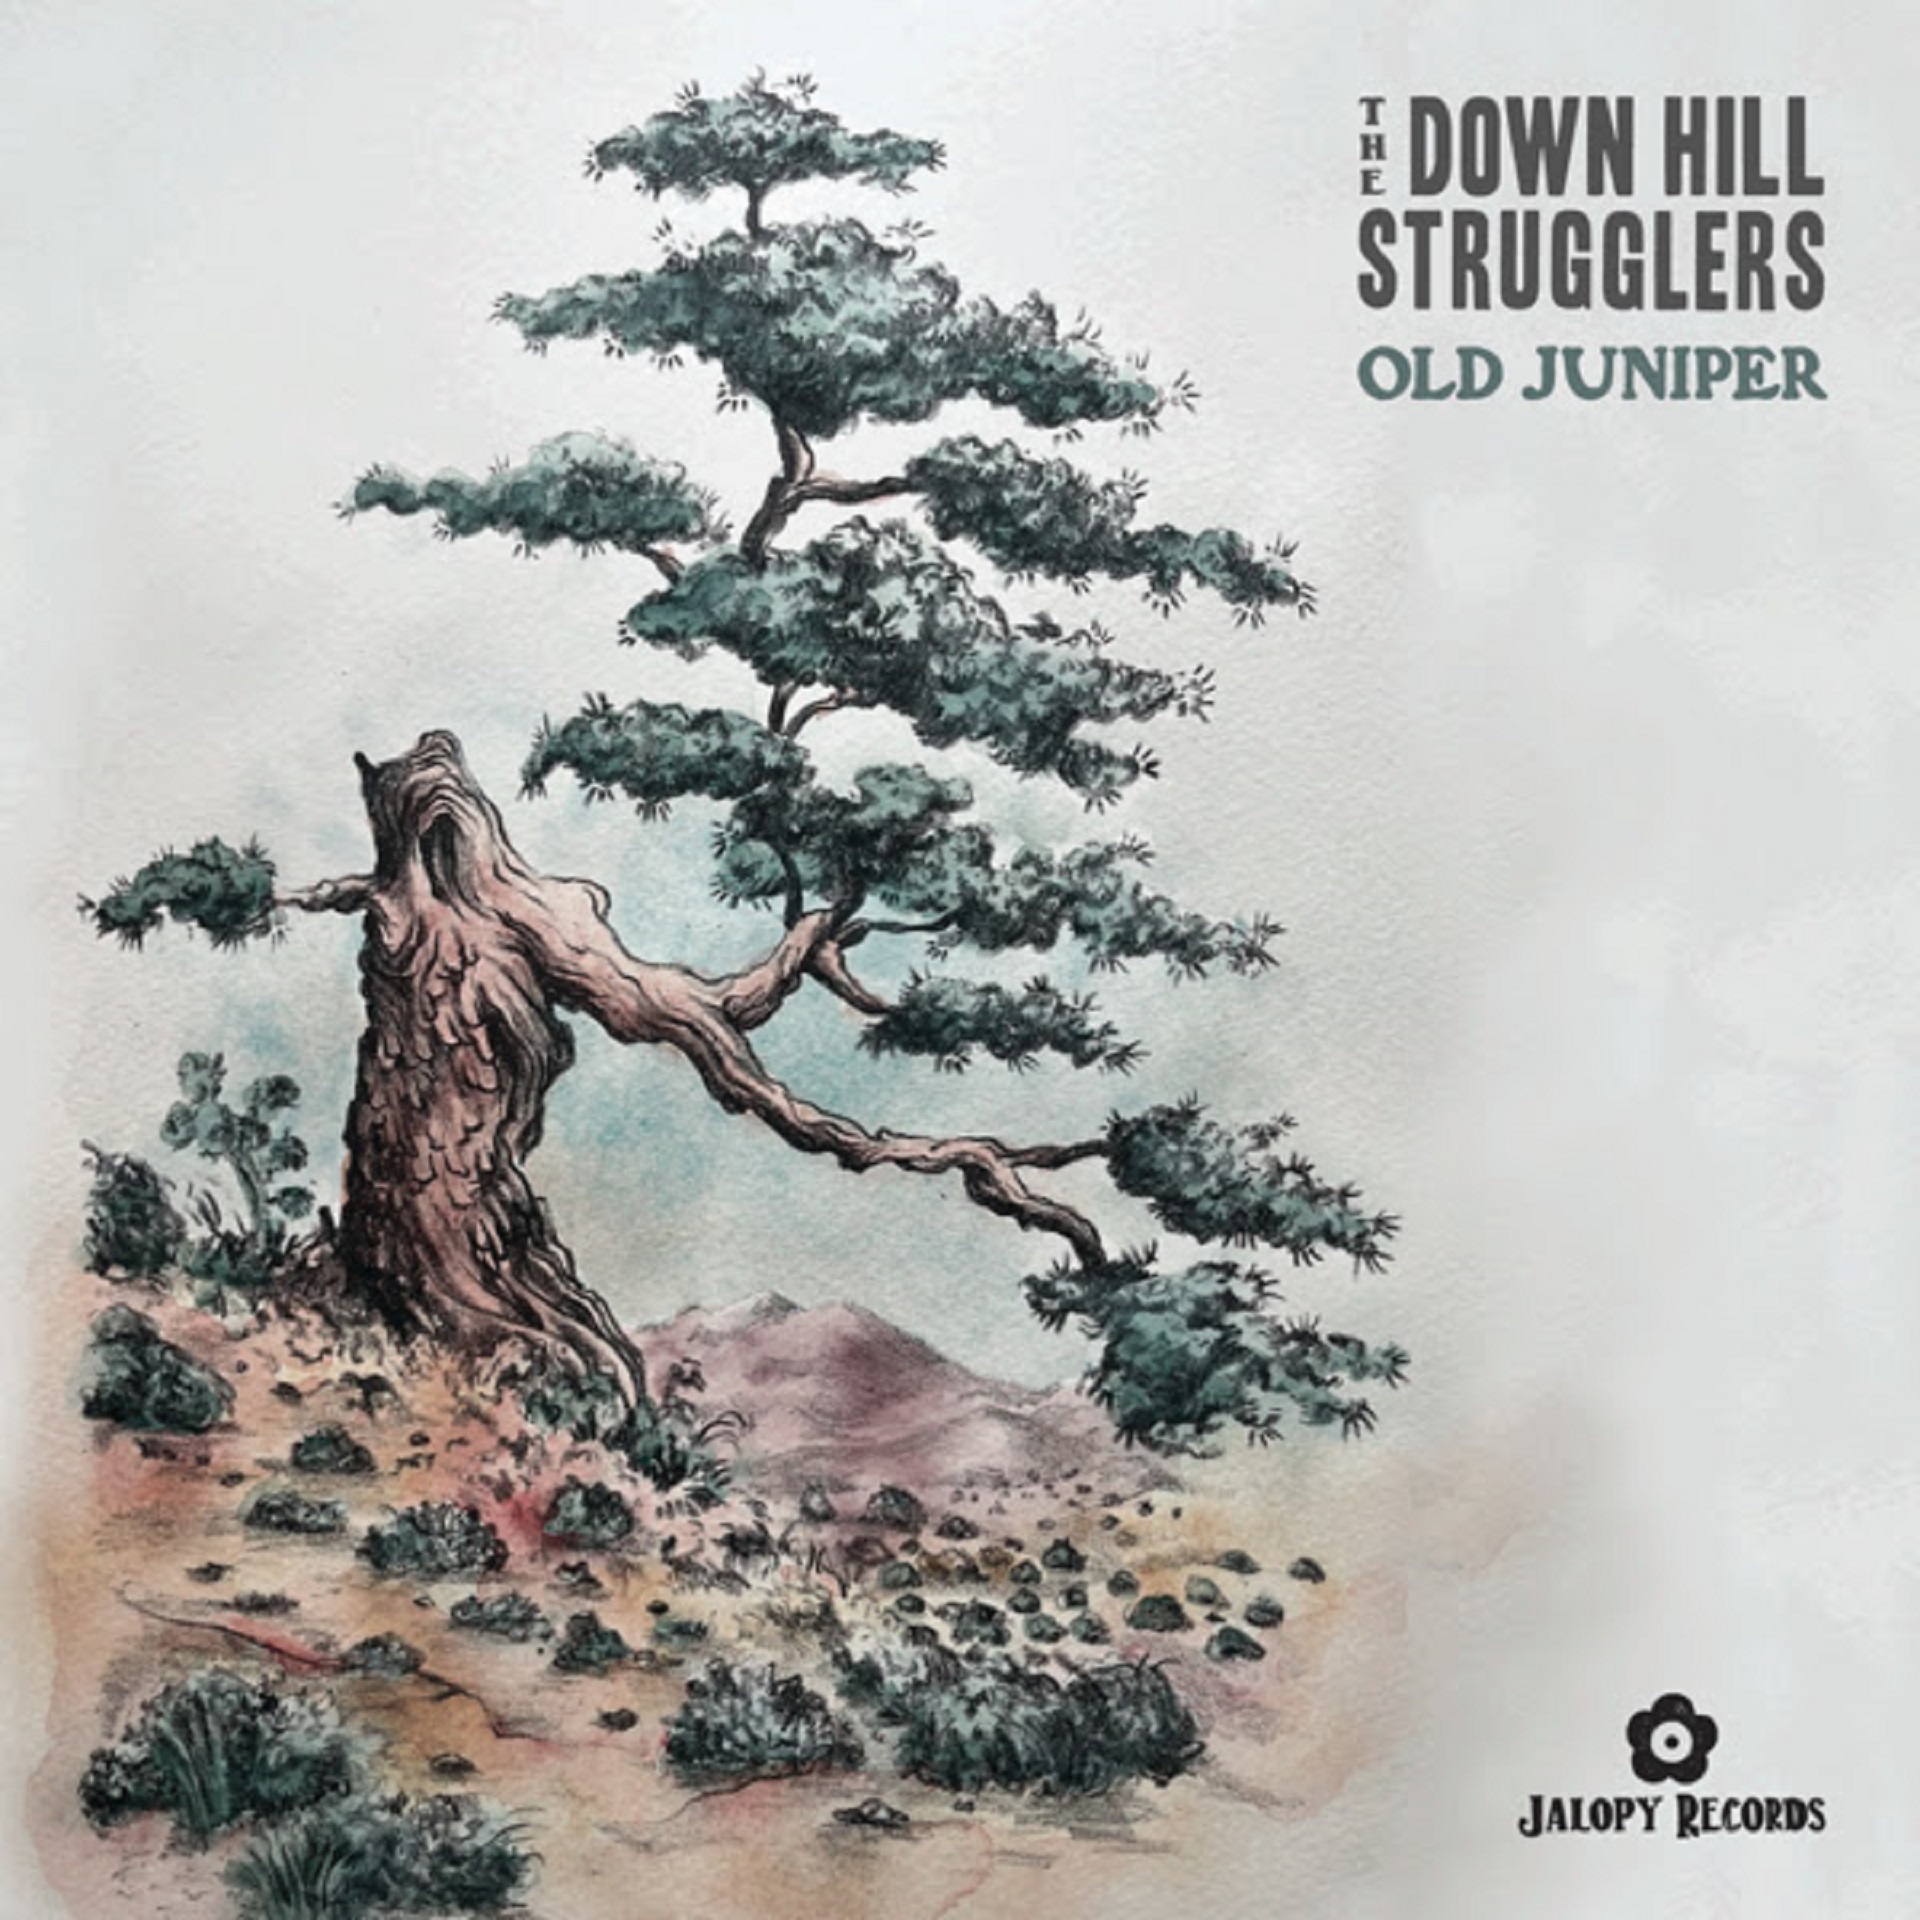 DOWN HILL STRUGGLERS SHARE JAUNTY, HUMOROUS SINGLE “LET THE RICH GO BUST”